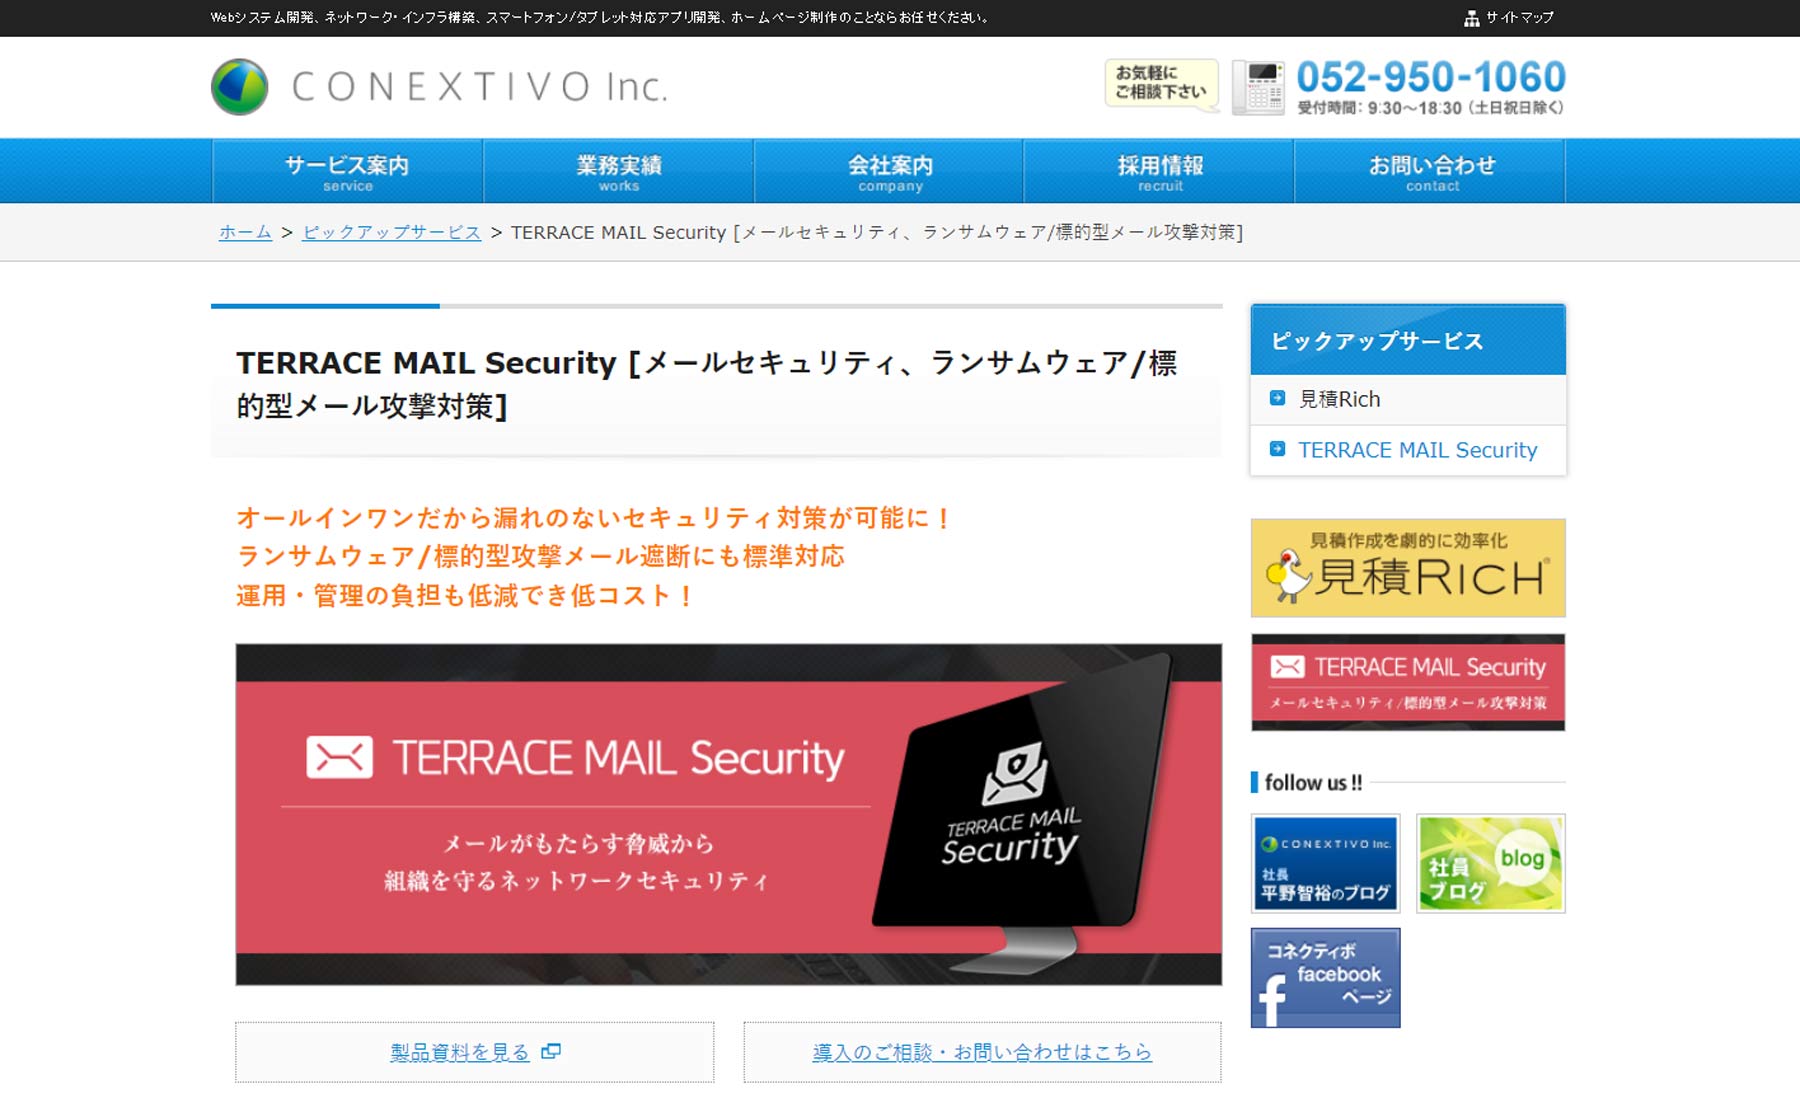 TERRACE MAIL Security公式Webサイト